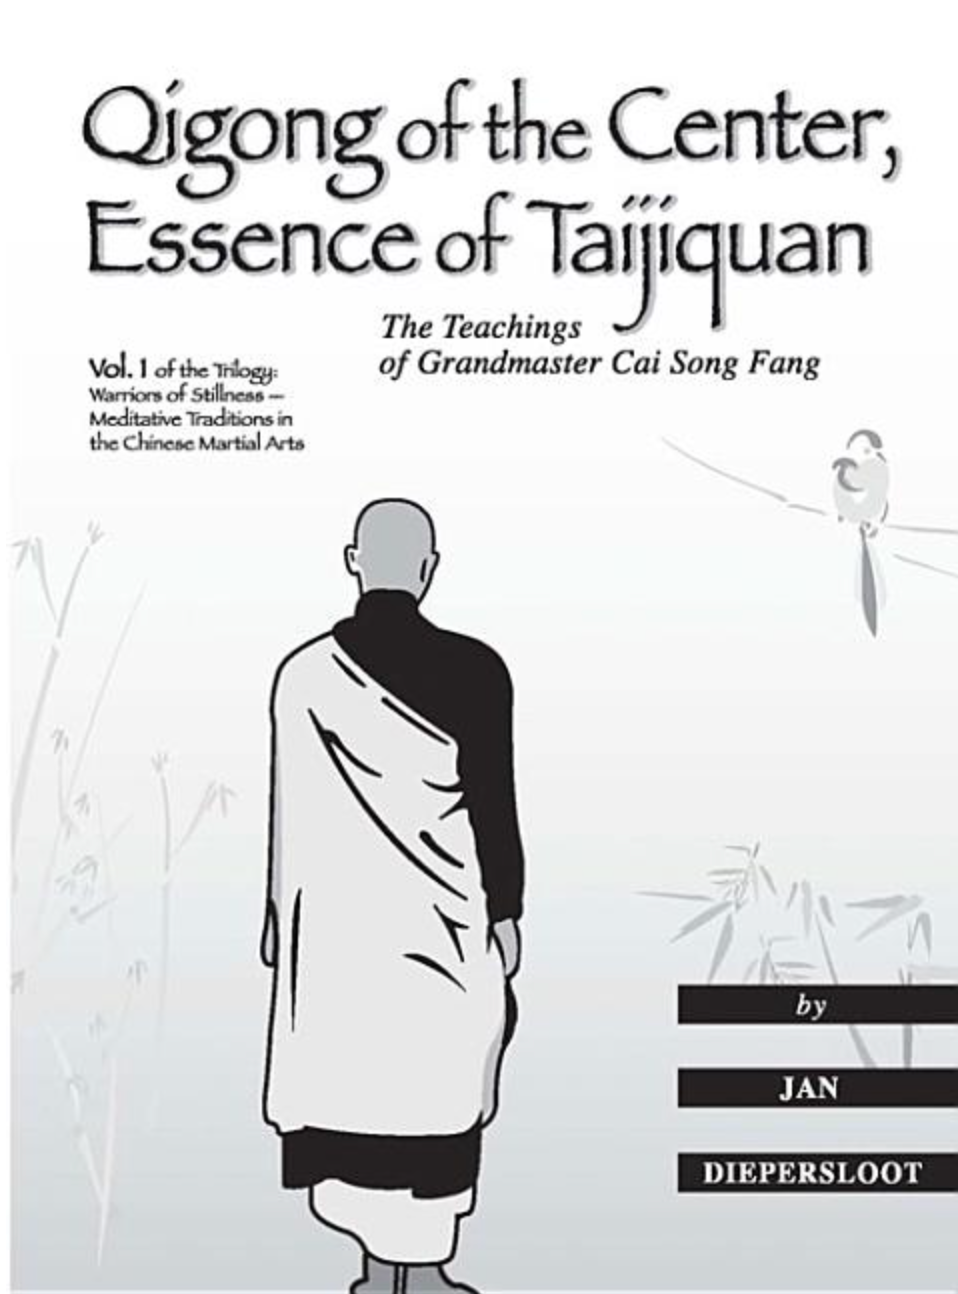 Warriors of Stillness Book 1: Qigong of the Center, Essence of Taijiquan: The Teachings of Grandmaster Cai Song Fang by Jan Diepersloot - Budovideos Inc